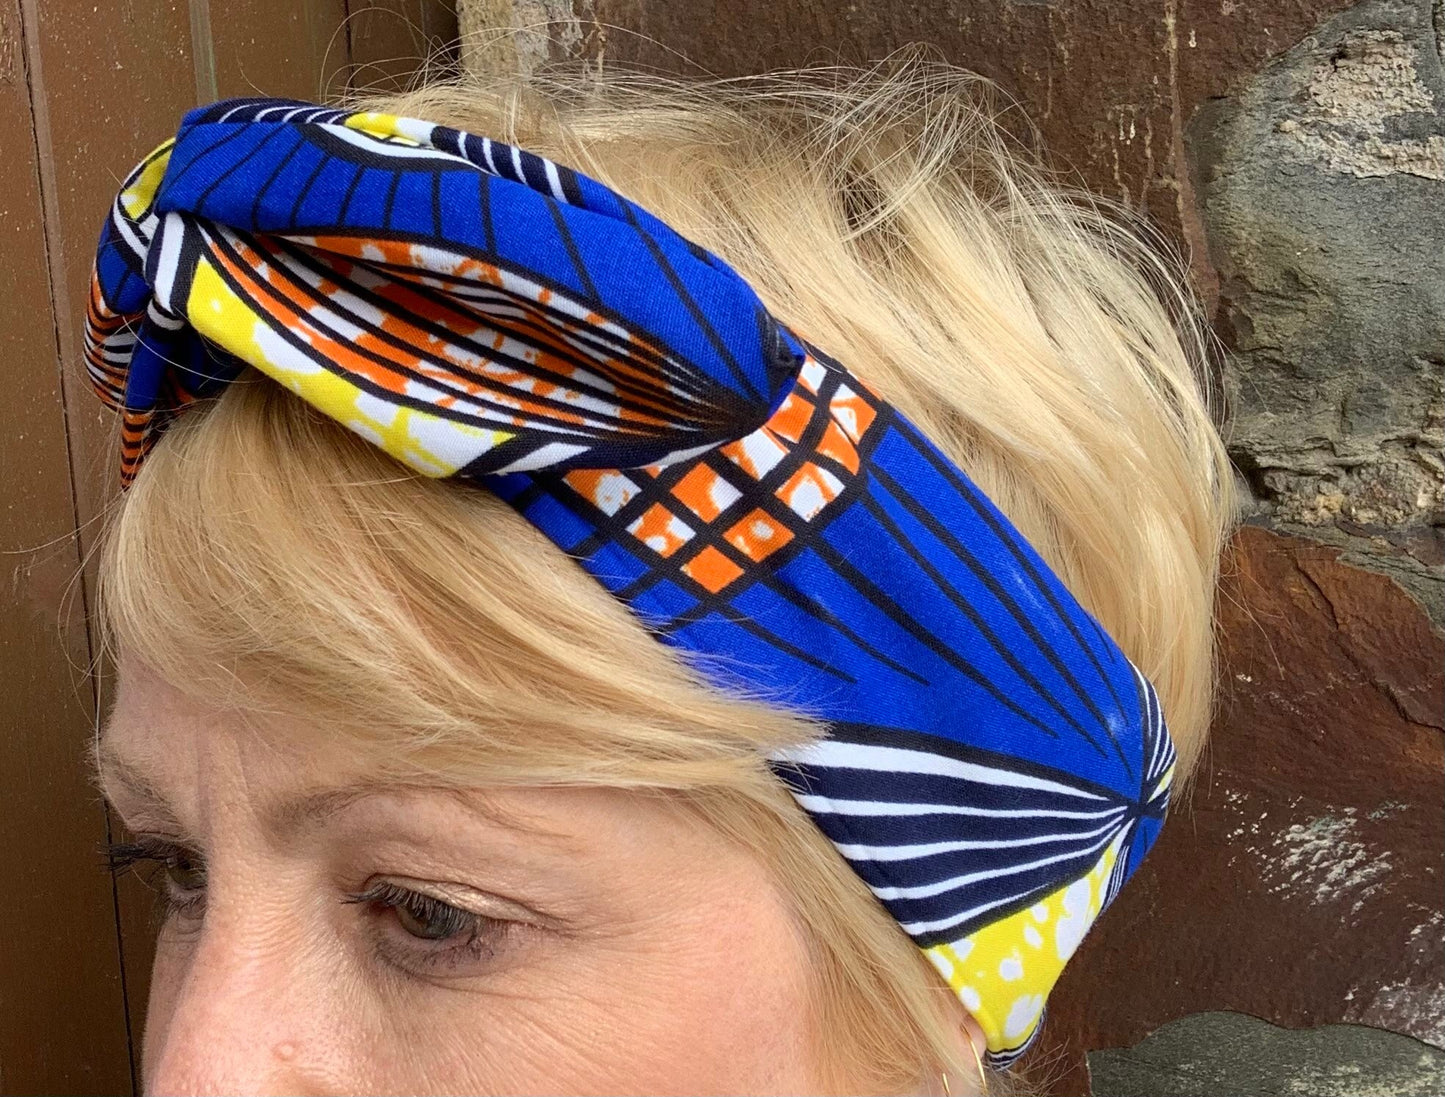 Handmade African fabric & wire twist vintage style hairband